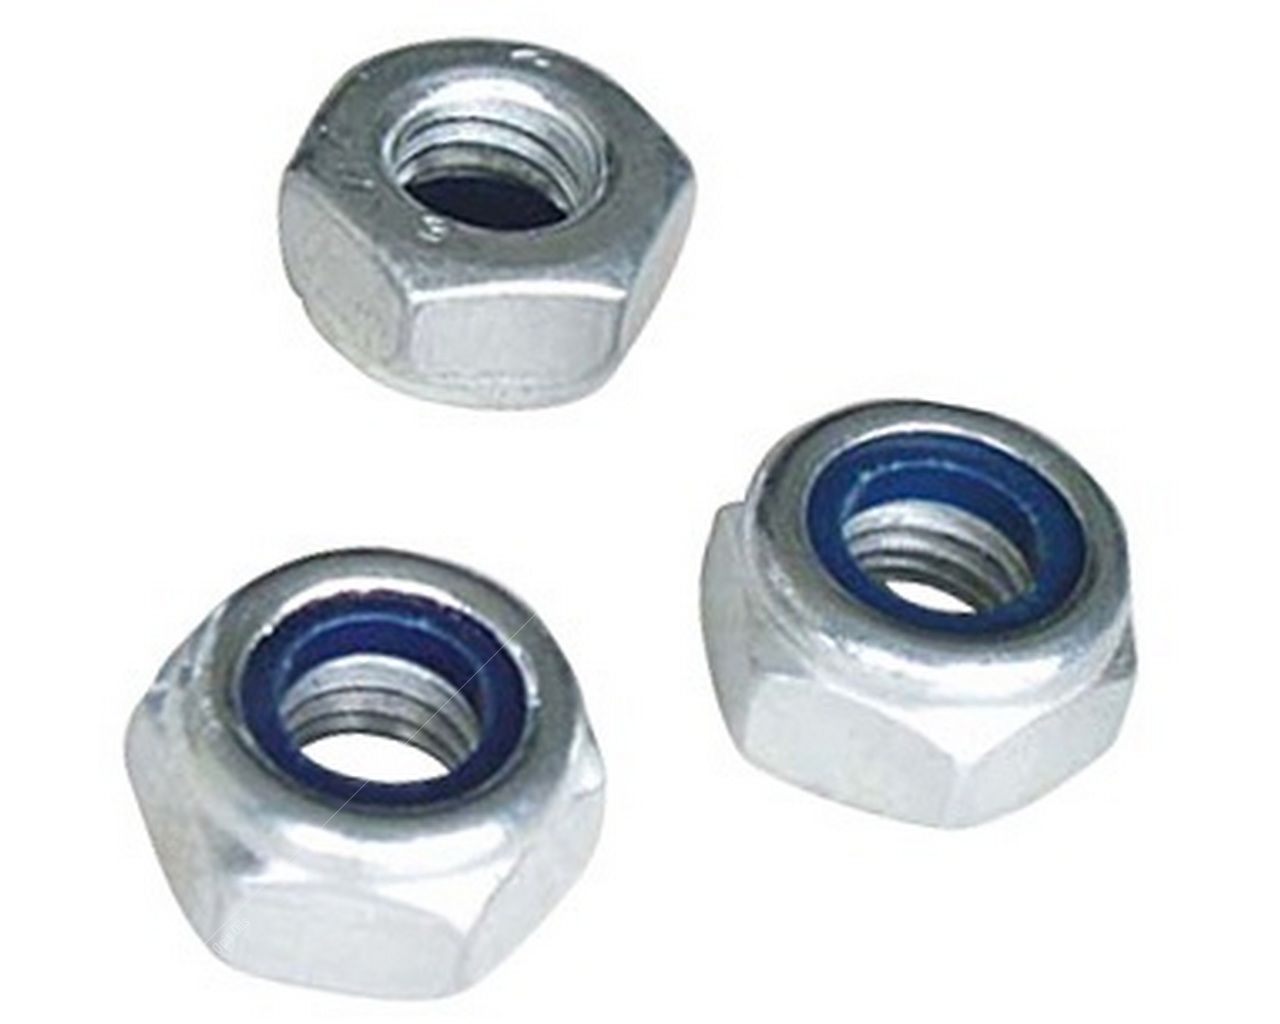 - Pack of 4 Wot-Nots Self Locking Nuts M8 x 1.25mm Pitch PWN316 